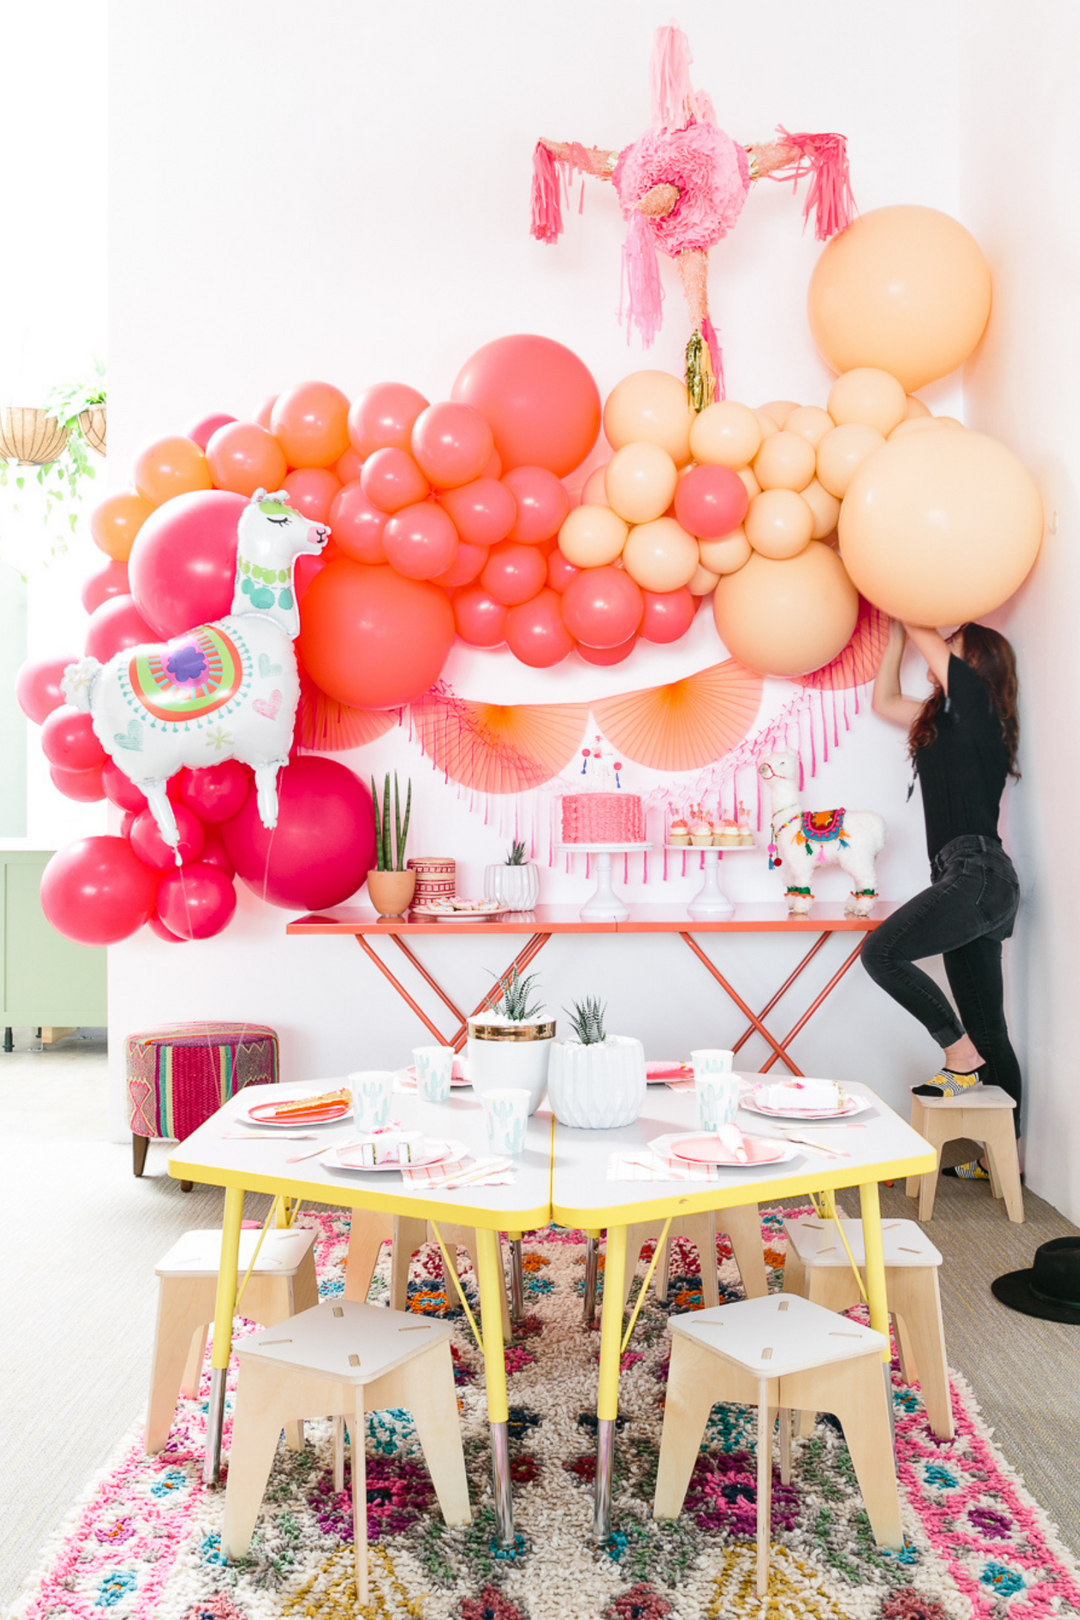 Pink and peach balloon garland with fiesta decorations - Los Angeles balloon installation